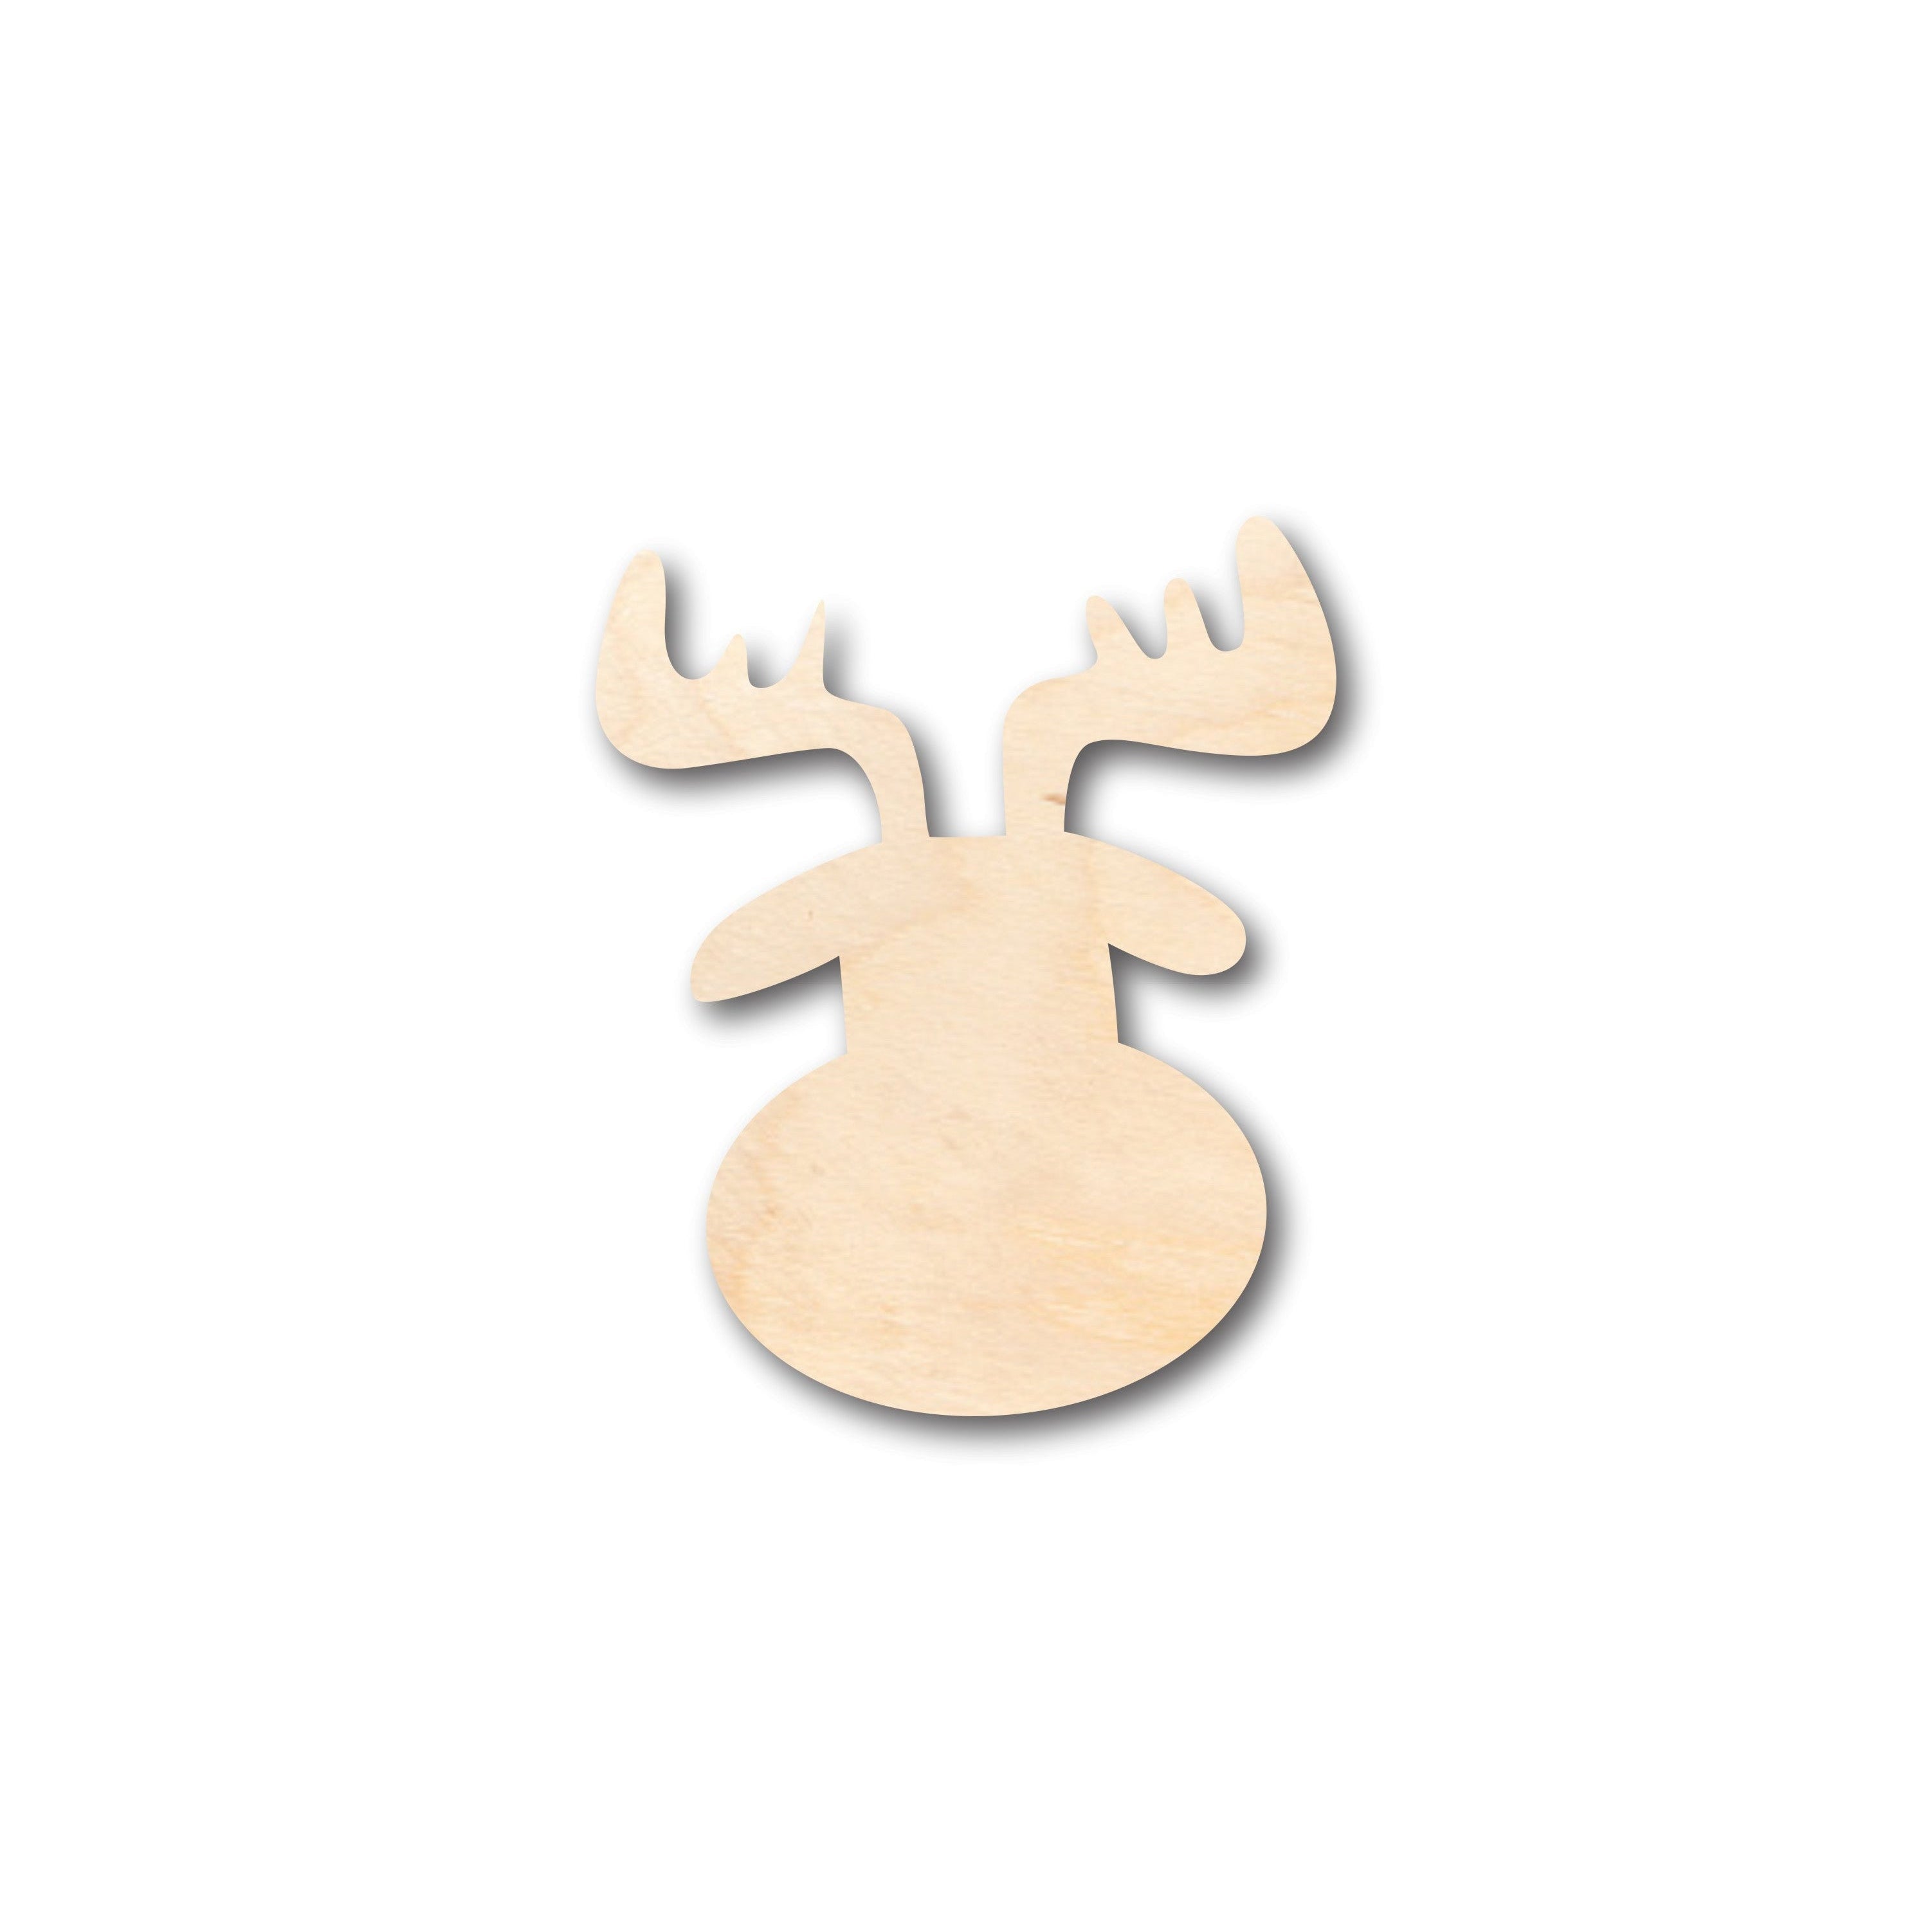 Unfinished Wood Cute Reindeer Head Shape - Craft - up to 36